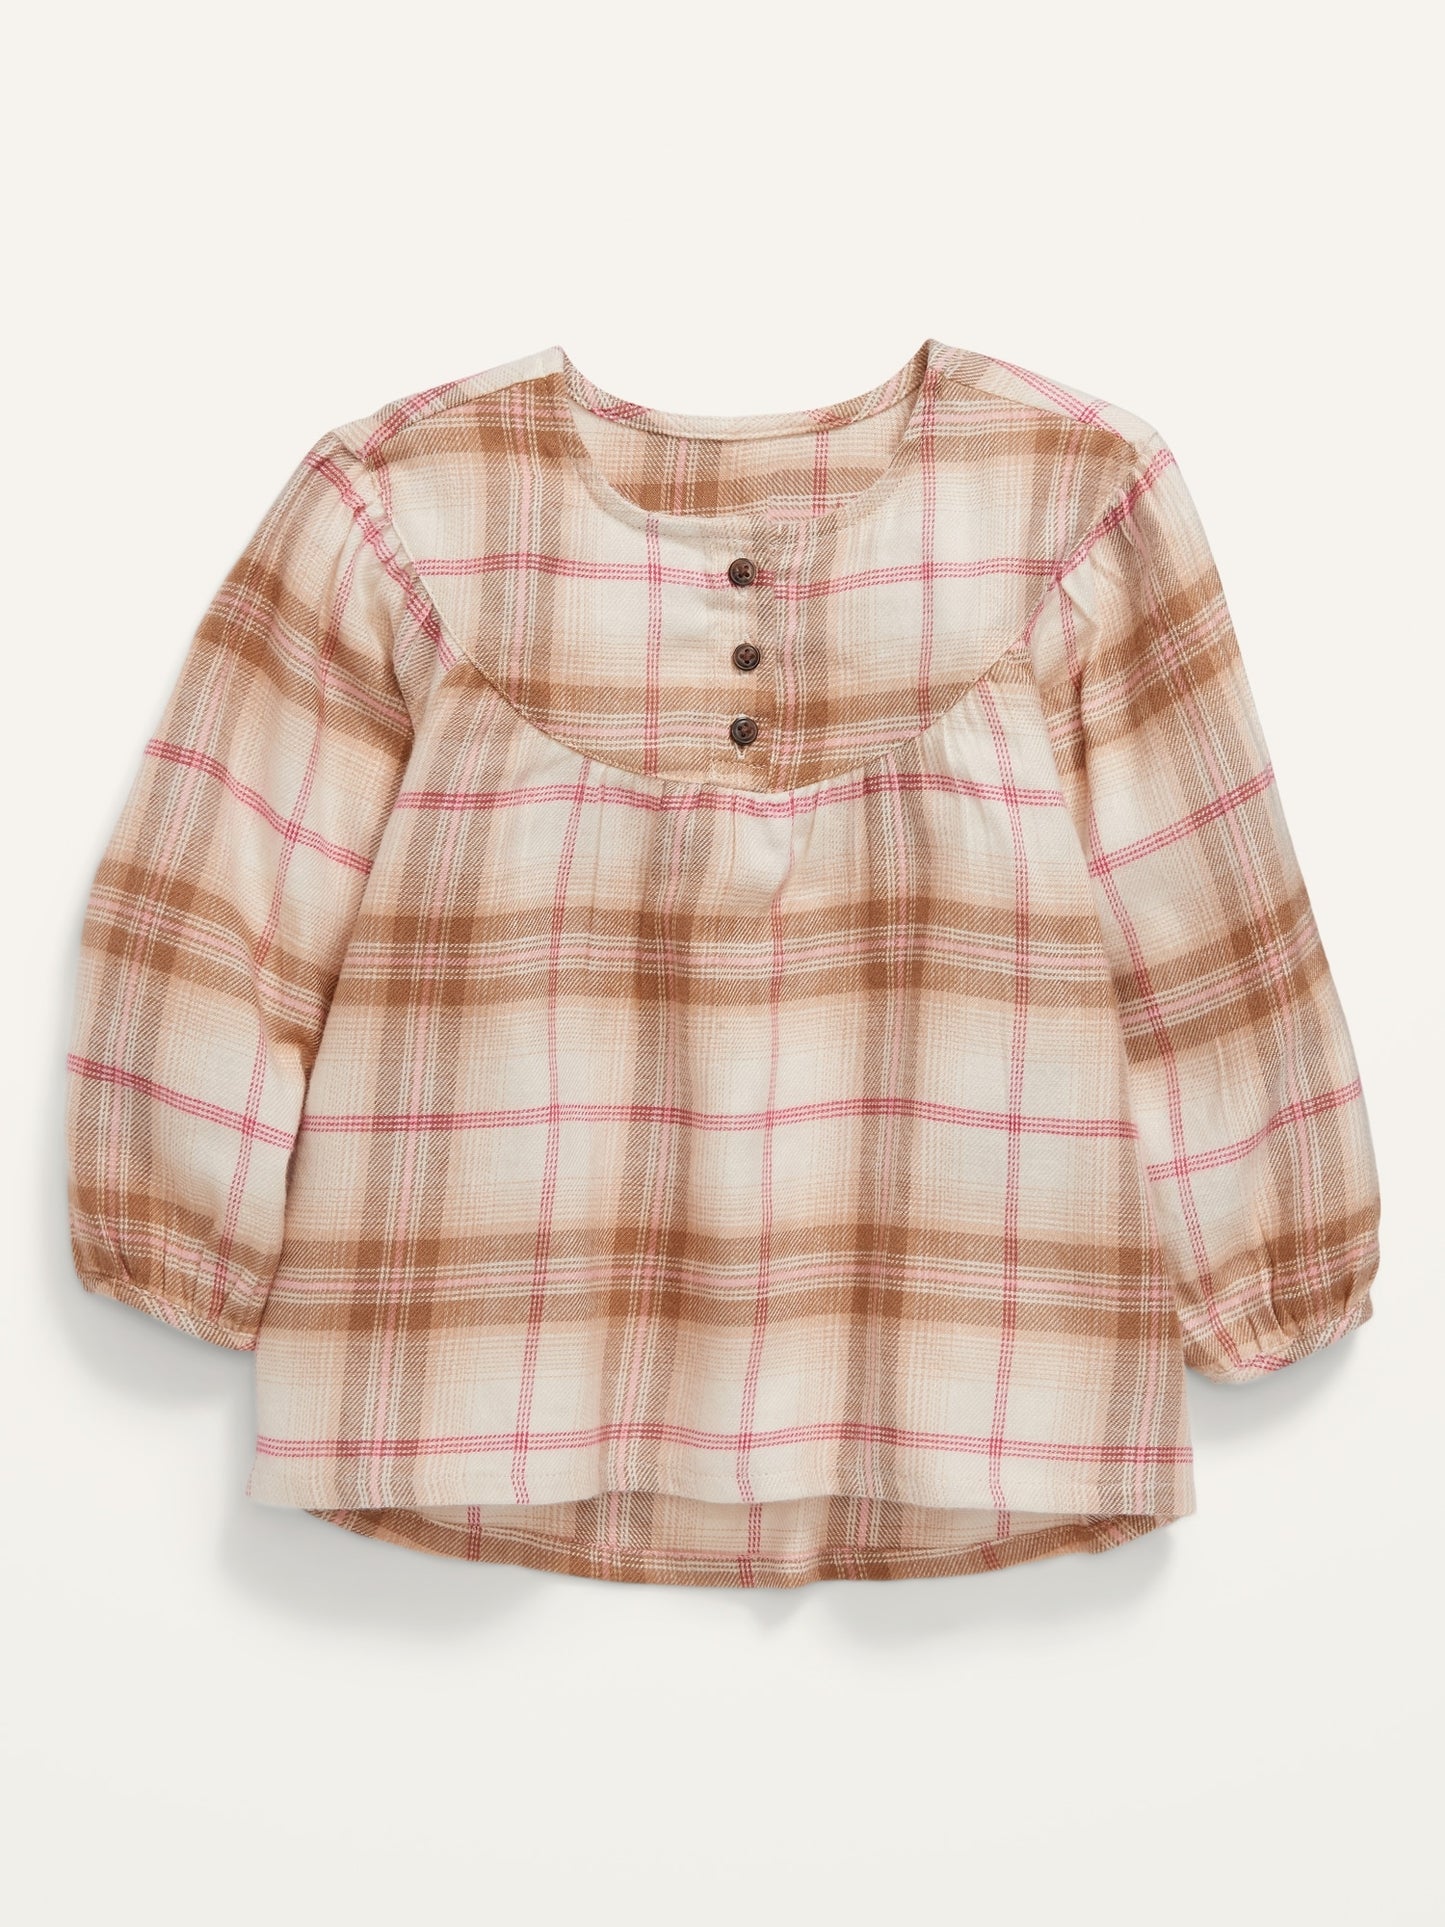 ON Plaid Flannel Babydoll Tunic Top For Toddler Girls - Neutral Plaid